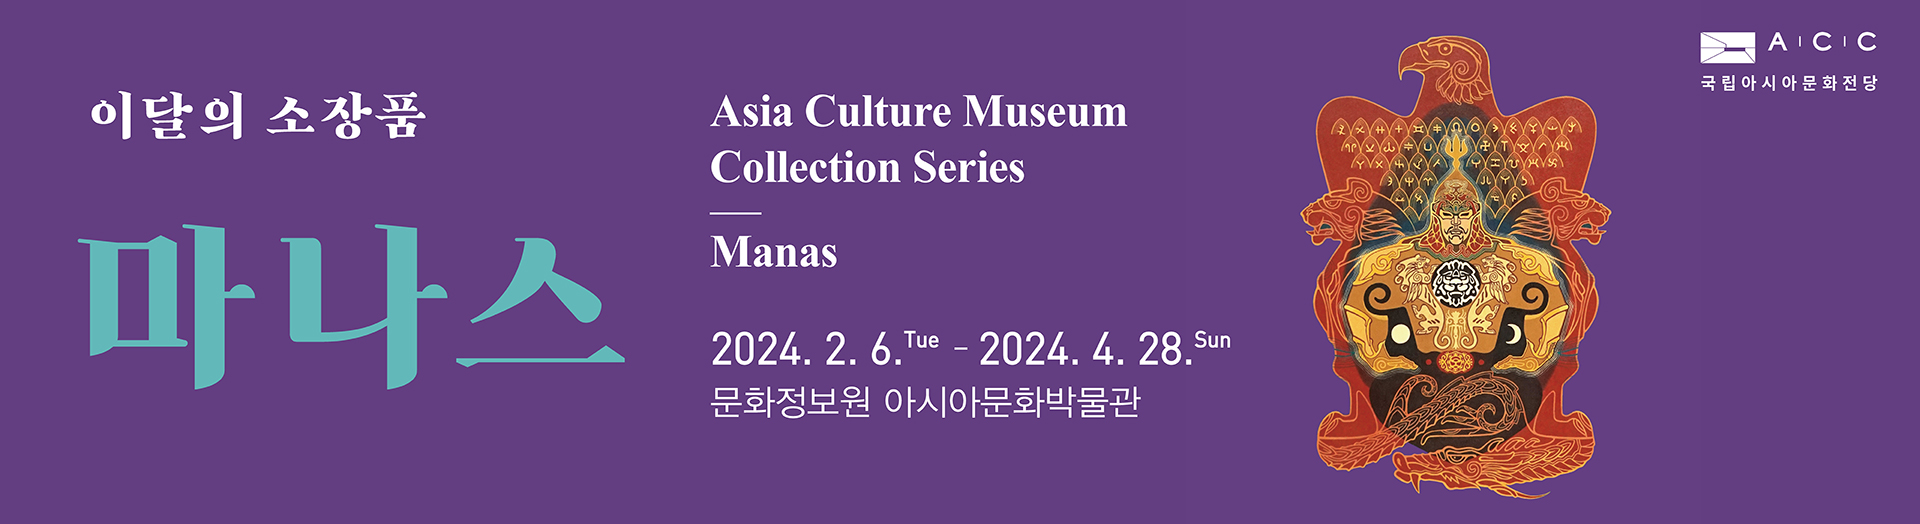 Asia Culture Museum Collection Series: Manas